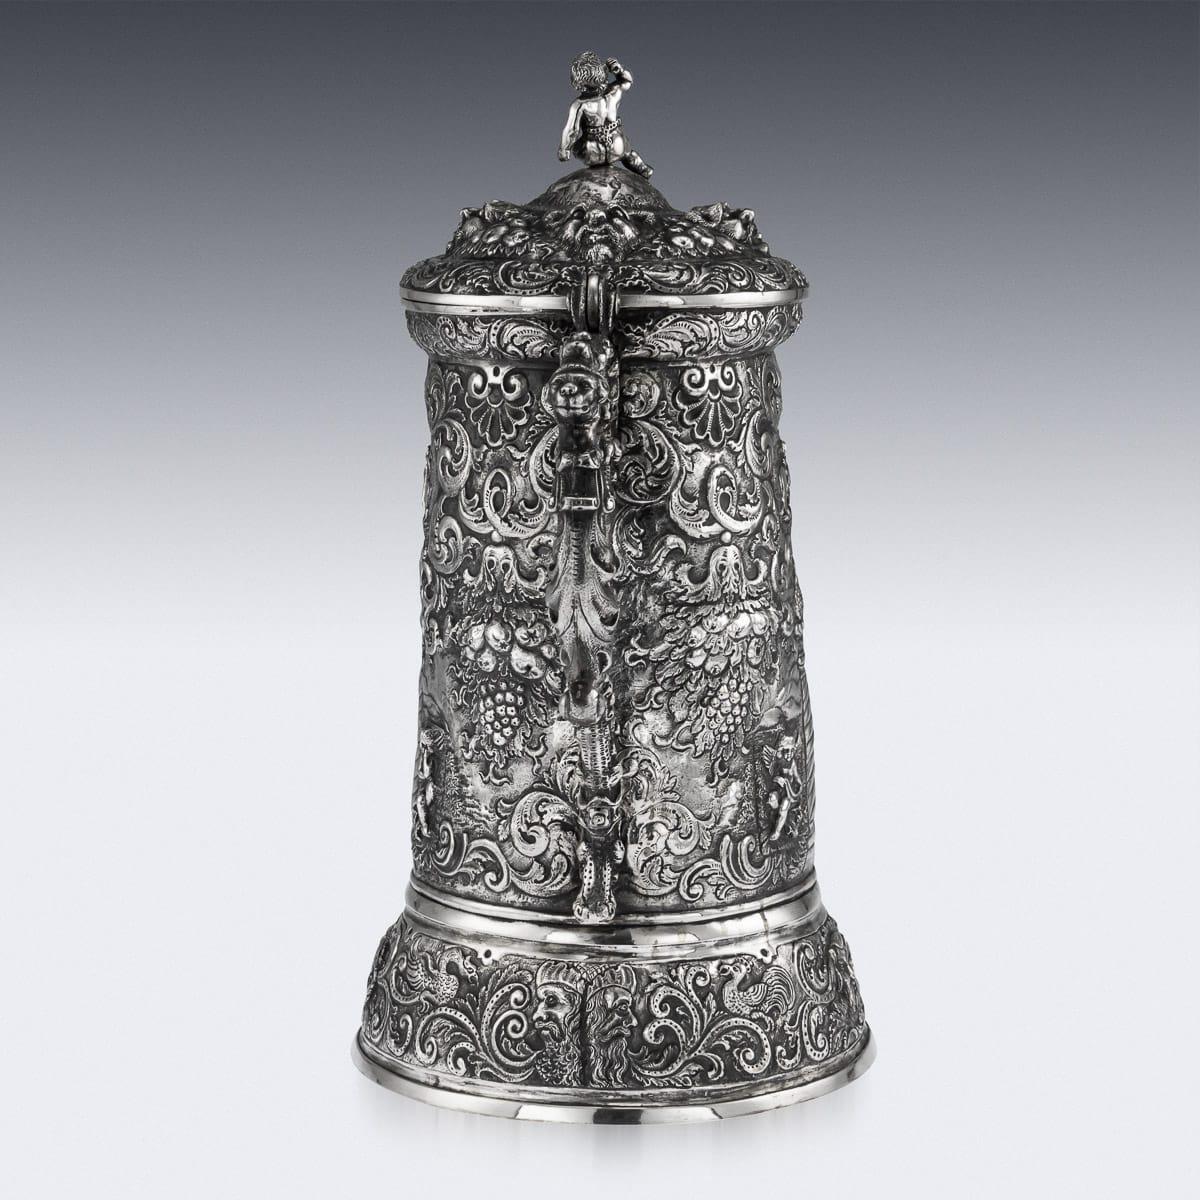 Antique mid-19th century German (Hanau) solid silver impressively large lidded tankard, in the style of the early 16th century pieces, beautifully chased and embossed with bacchanalia and agricultural scenes, embossed with cherubs, grotesque masks